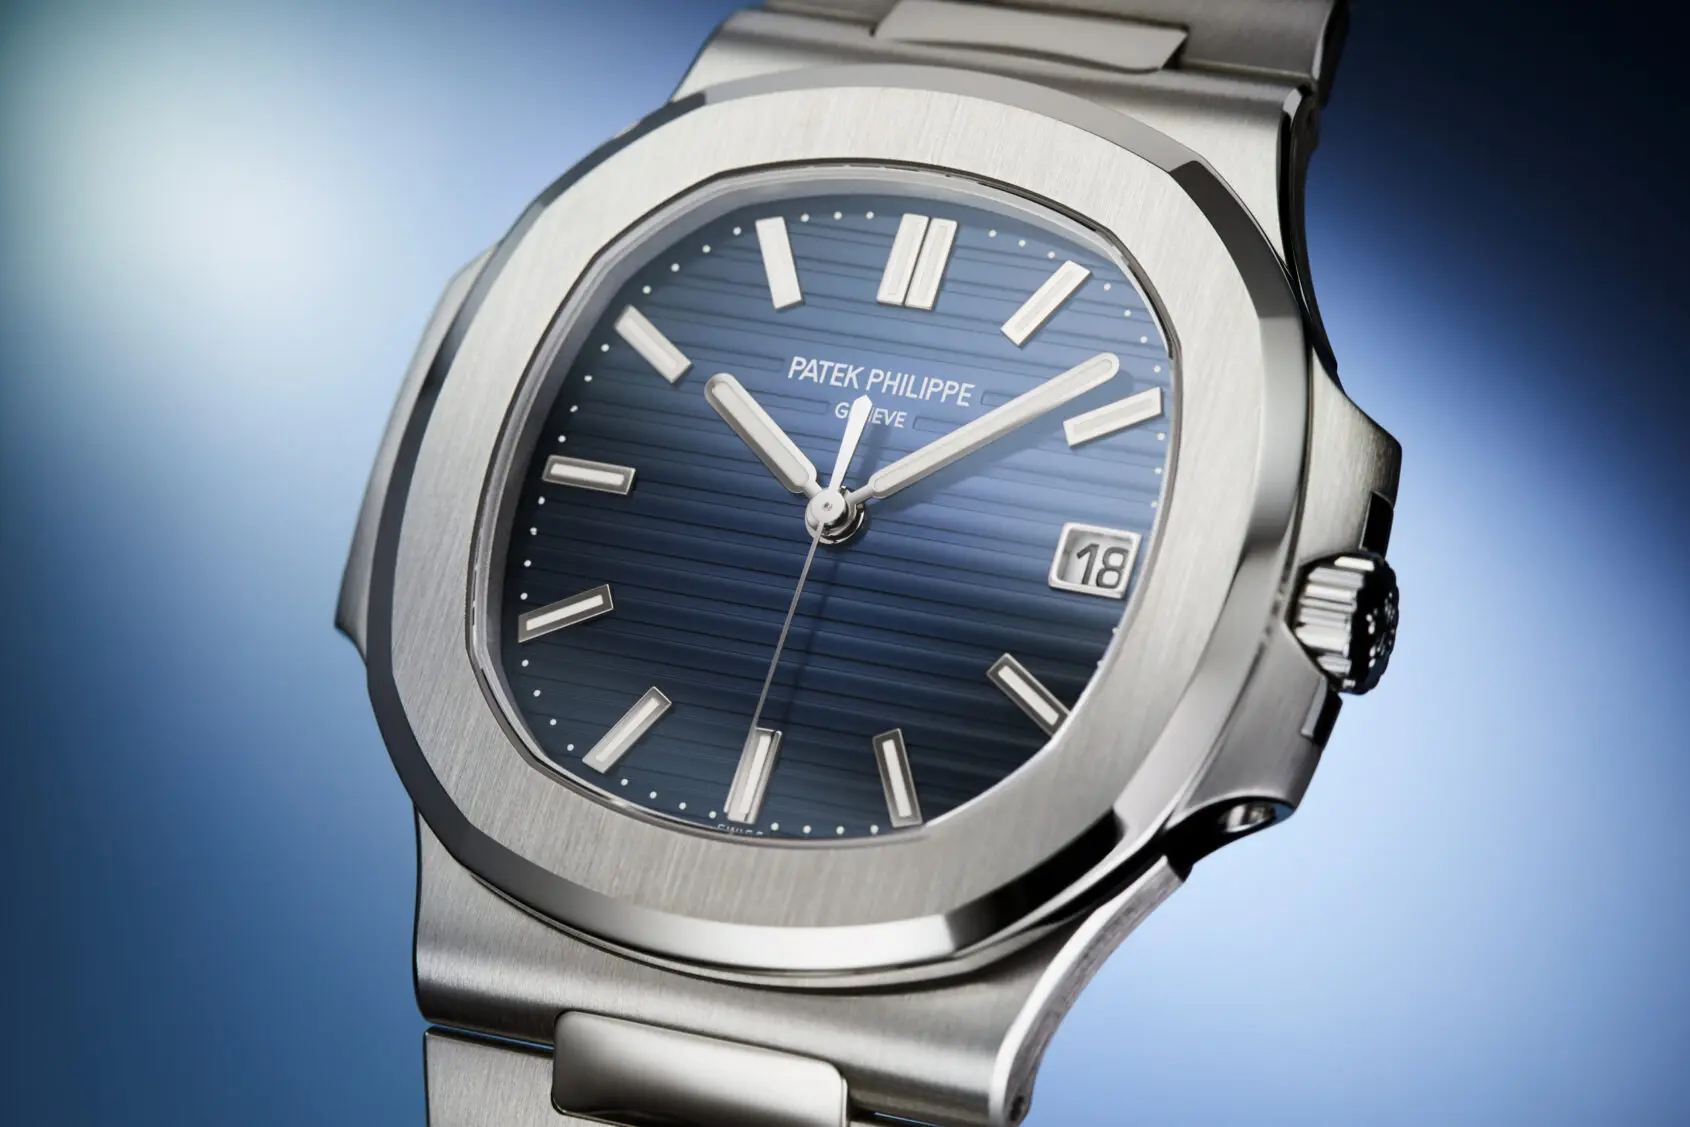 REVIEW OF THE PATEK PHILIPPE NAUTILUS 5711 GREEN - HANDS ON THE 5711/1A-014  & THOUGHTS ON THE FUTURE 